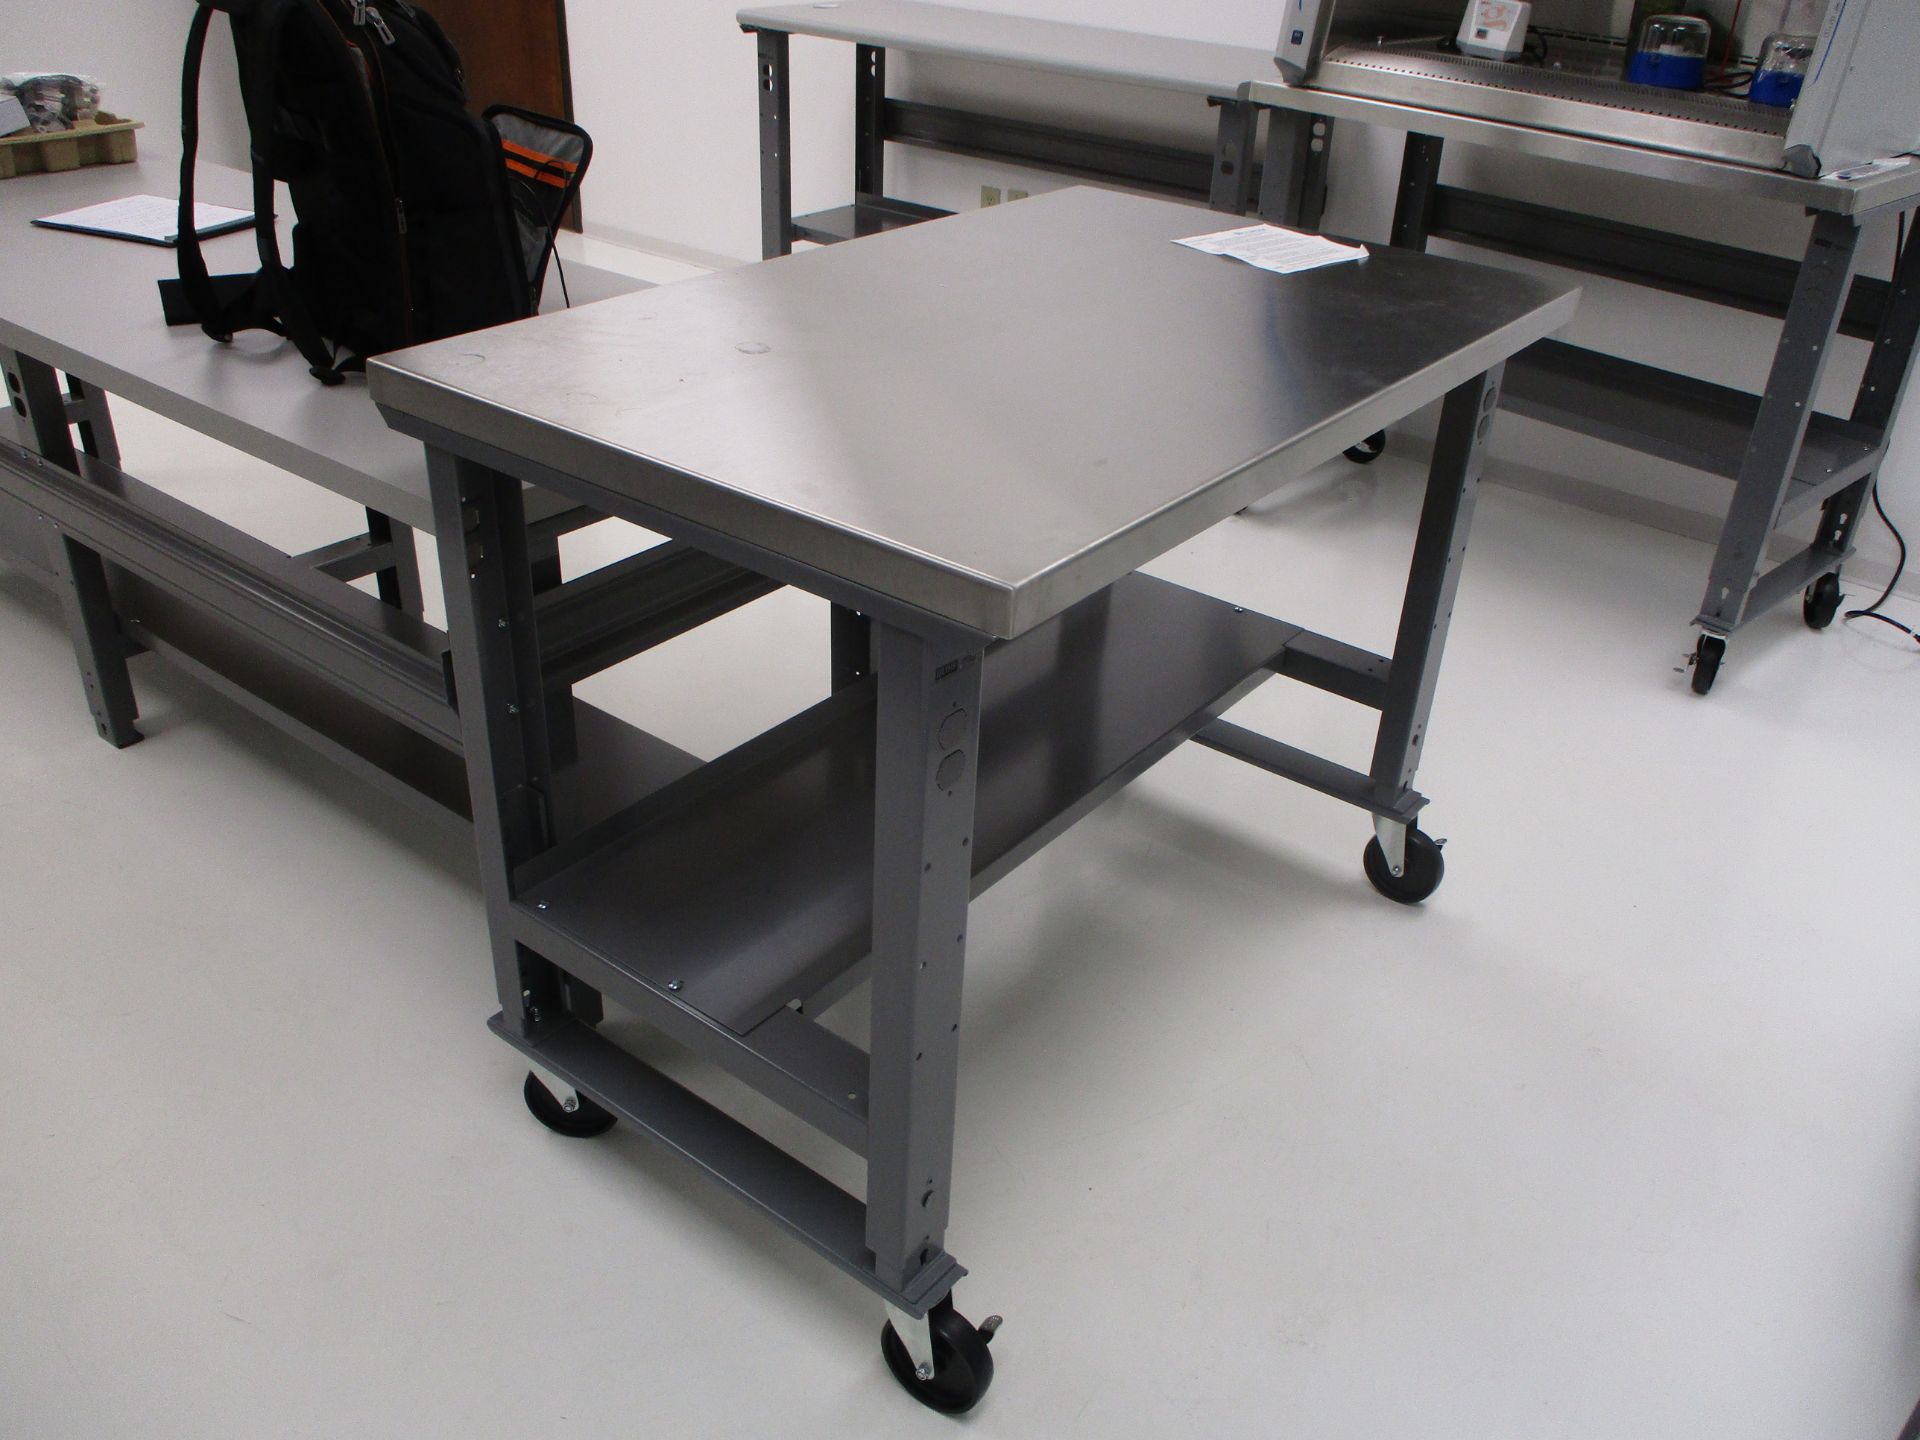 (2) Uline Work Tables with Stainless Steel Table Tops